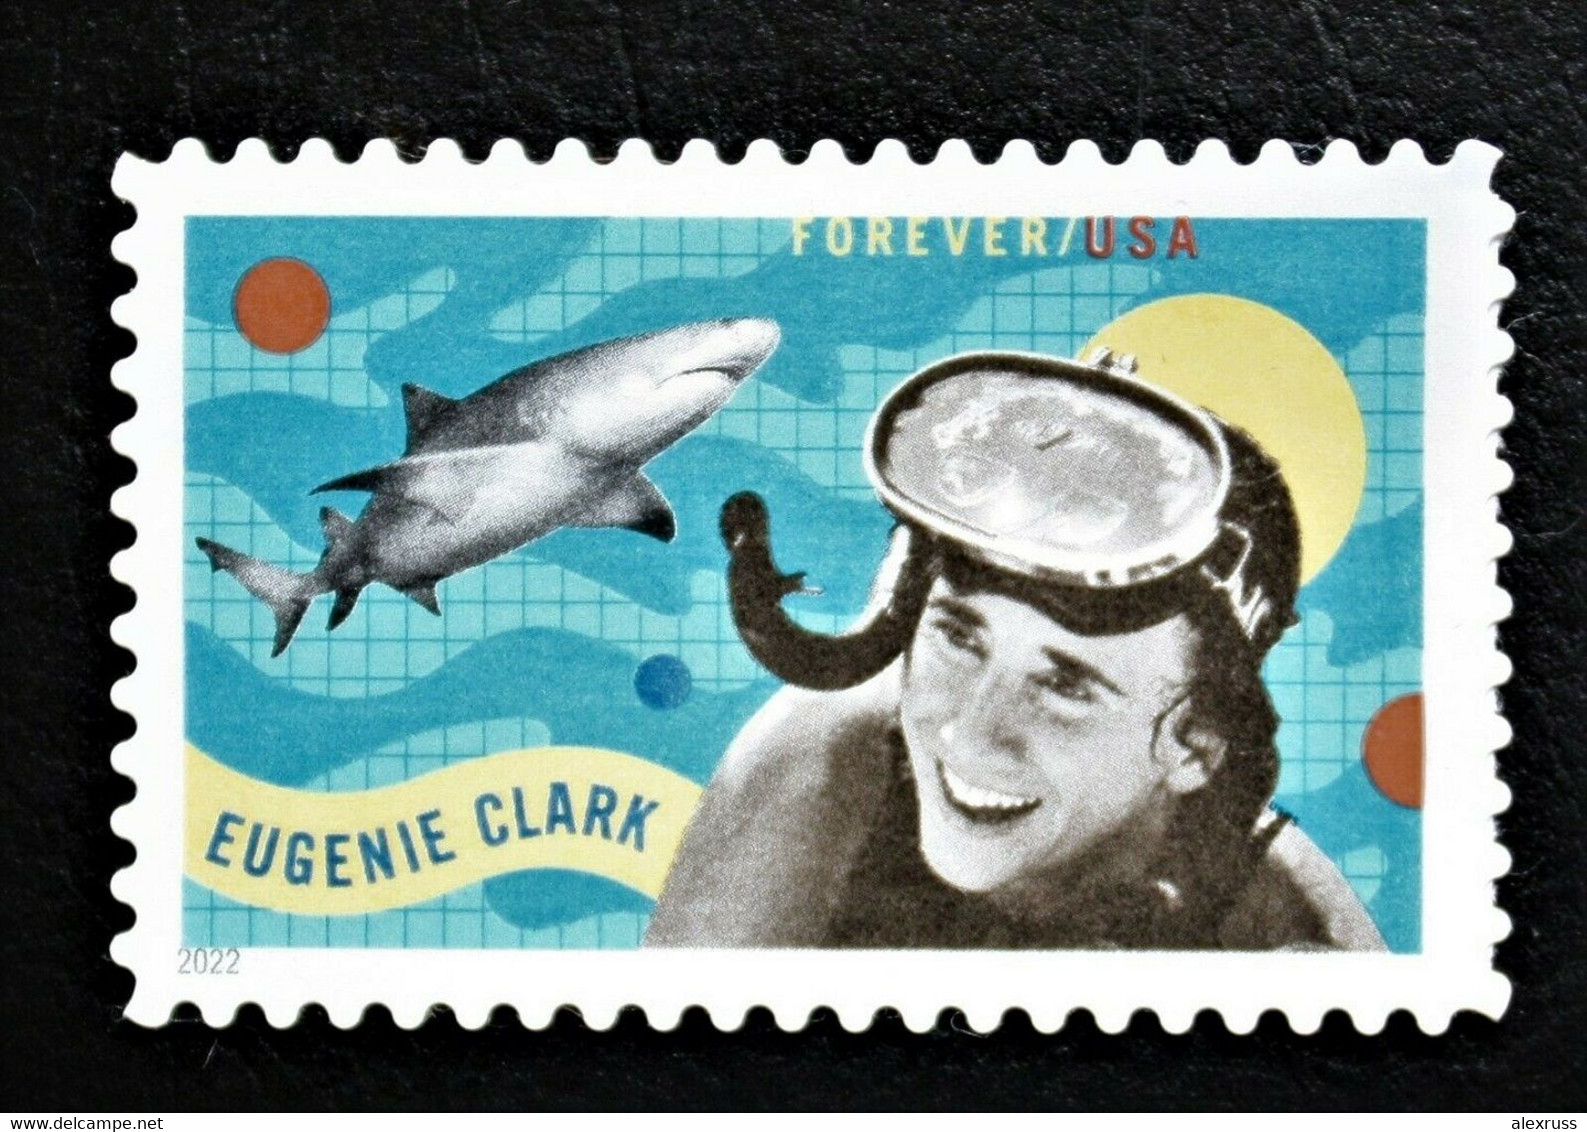 US 2022 Eugenie Clark "Shark Lady" Sheet Of 20 Forever Stamps, Scott # 5693,Special Micro Printing+, VF MNH** - Neufs